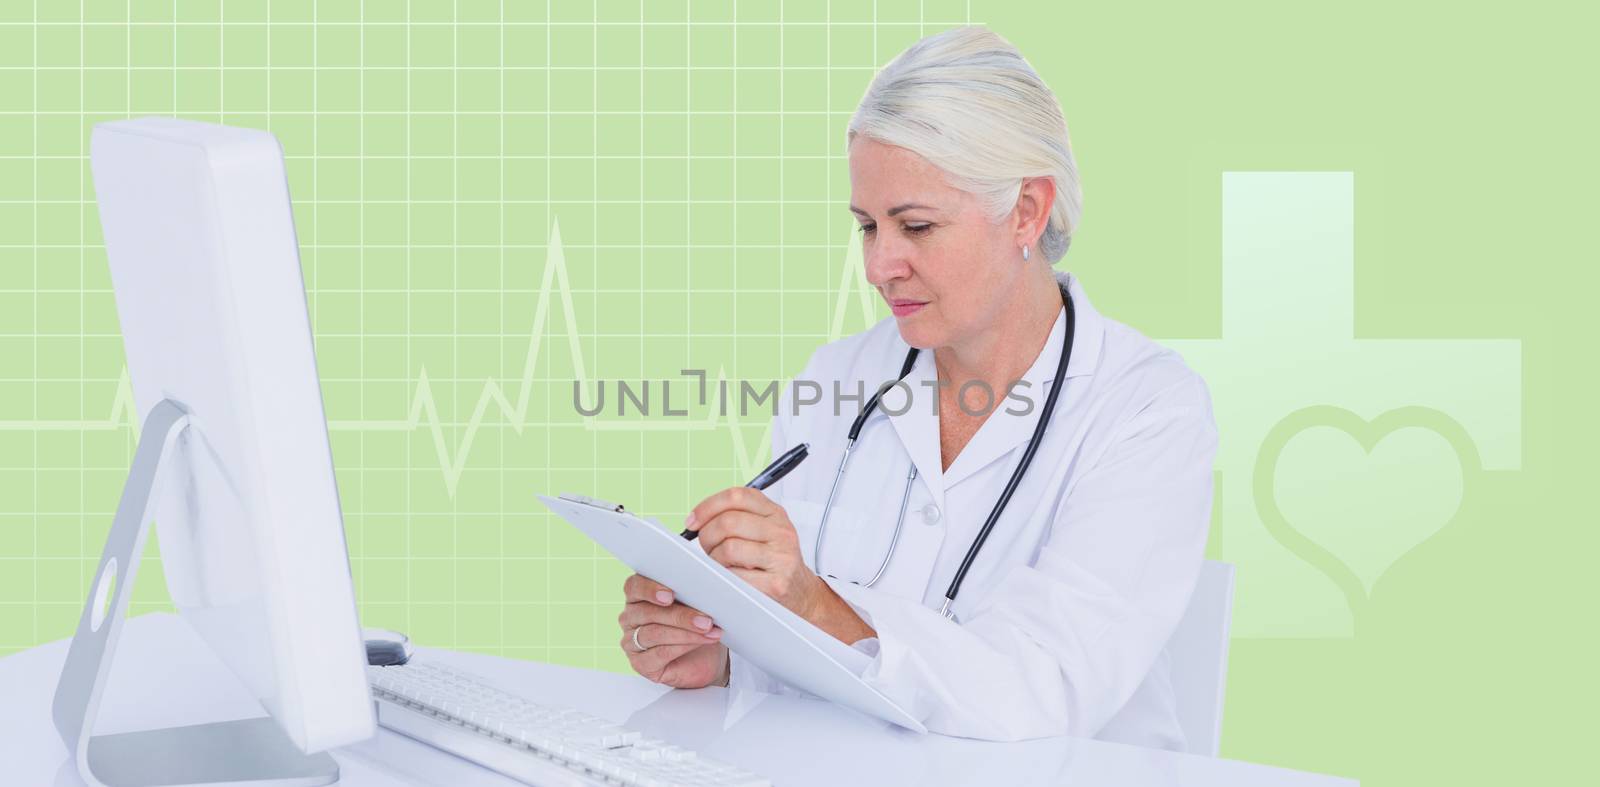 Female doctor writing on clipboard while sitting at desk against green background